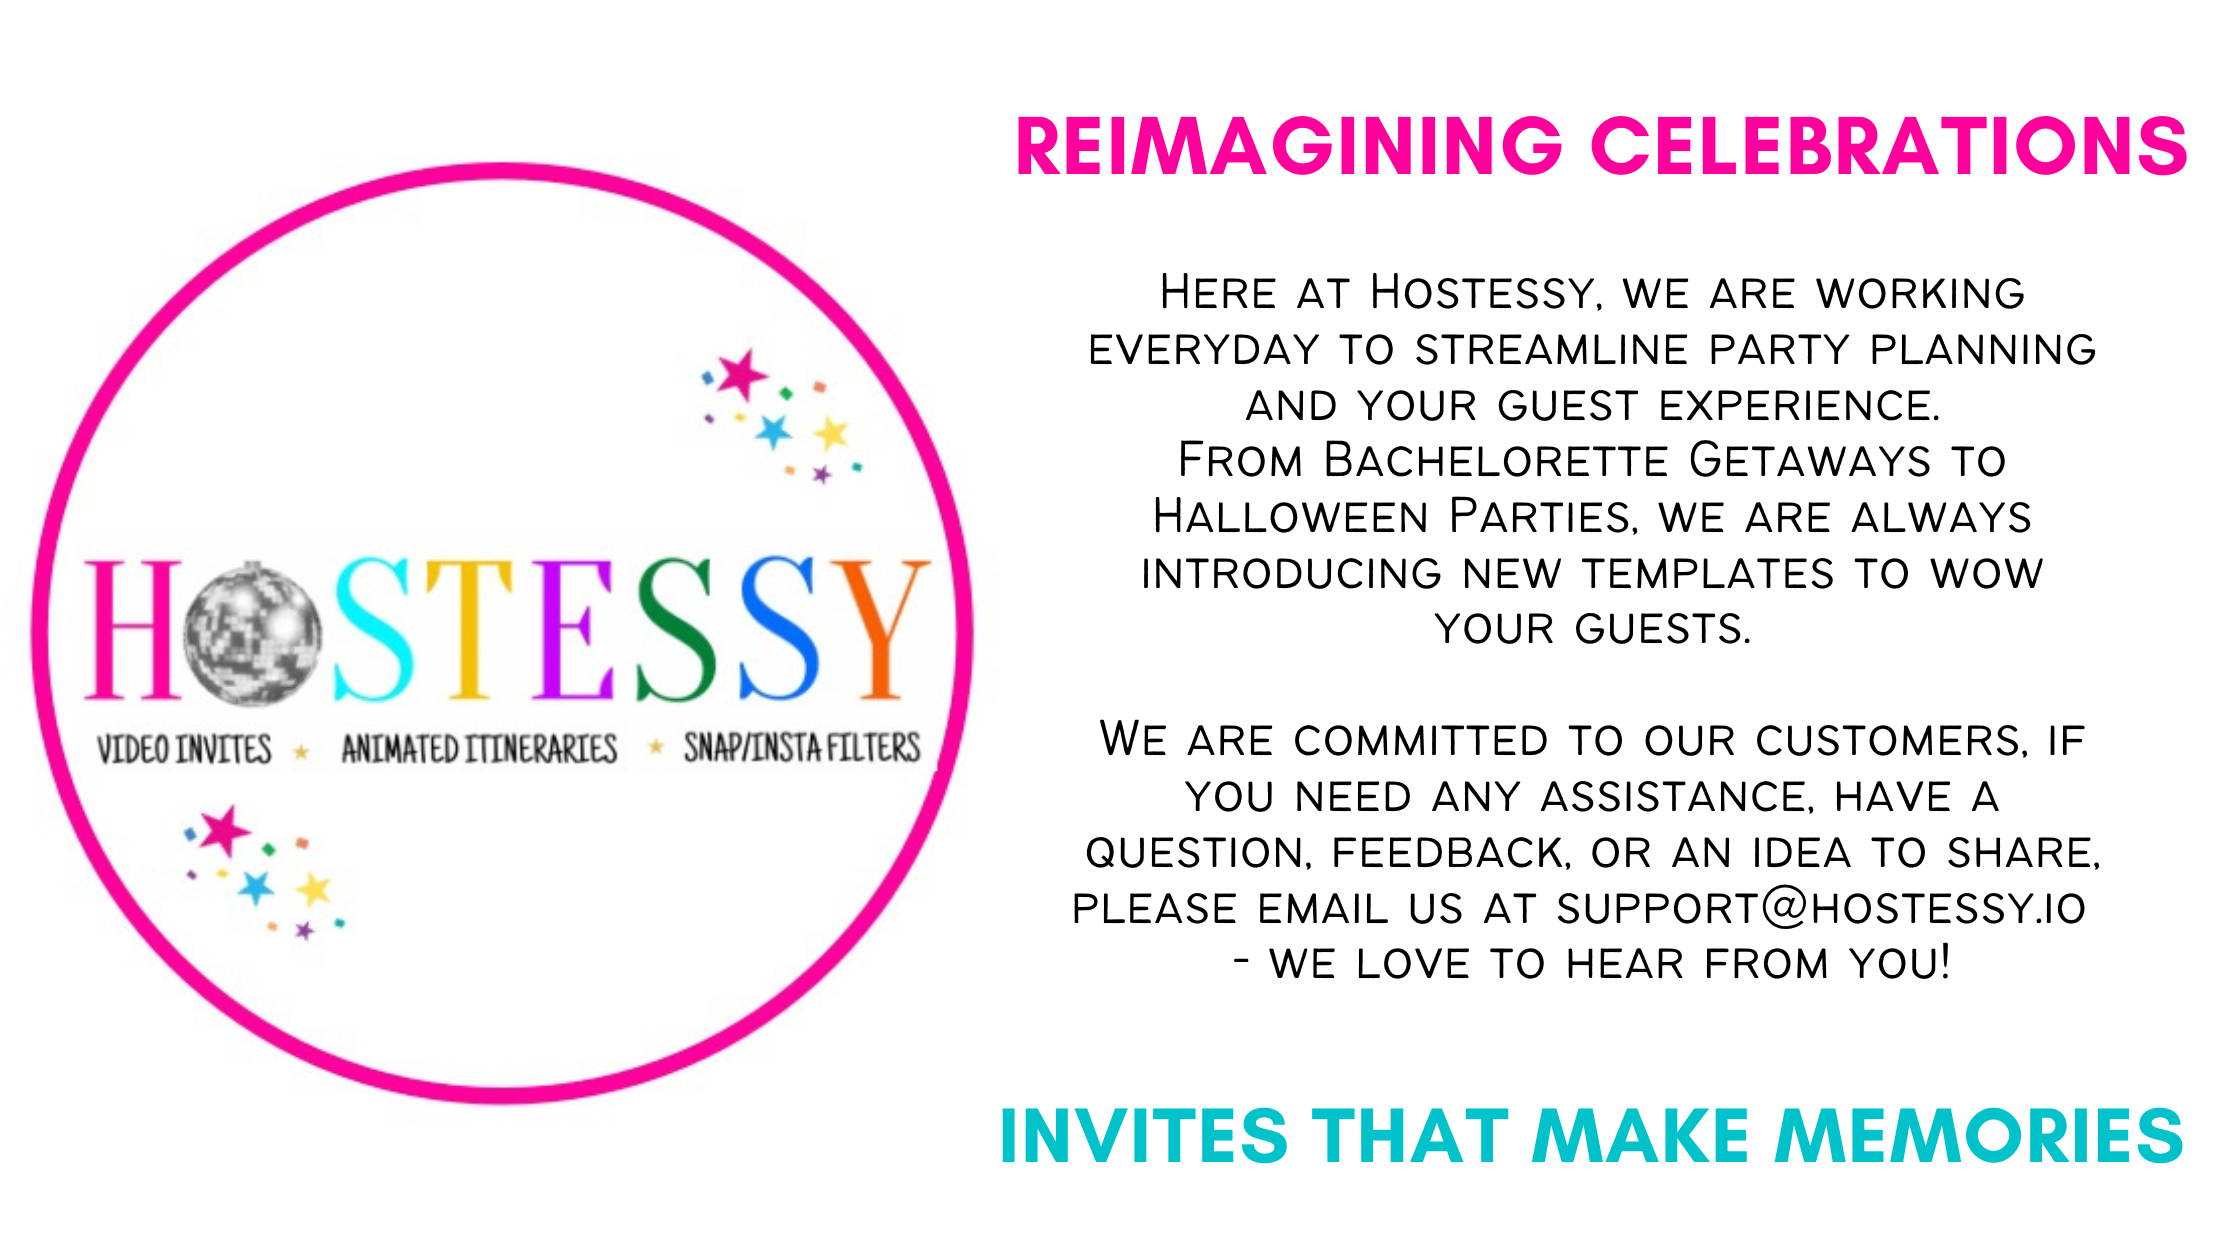 Hostessy Video Invitations and Itineraries